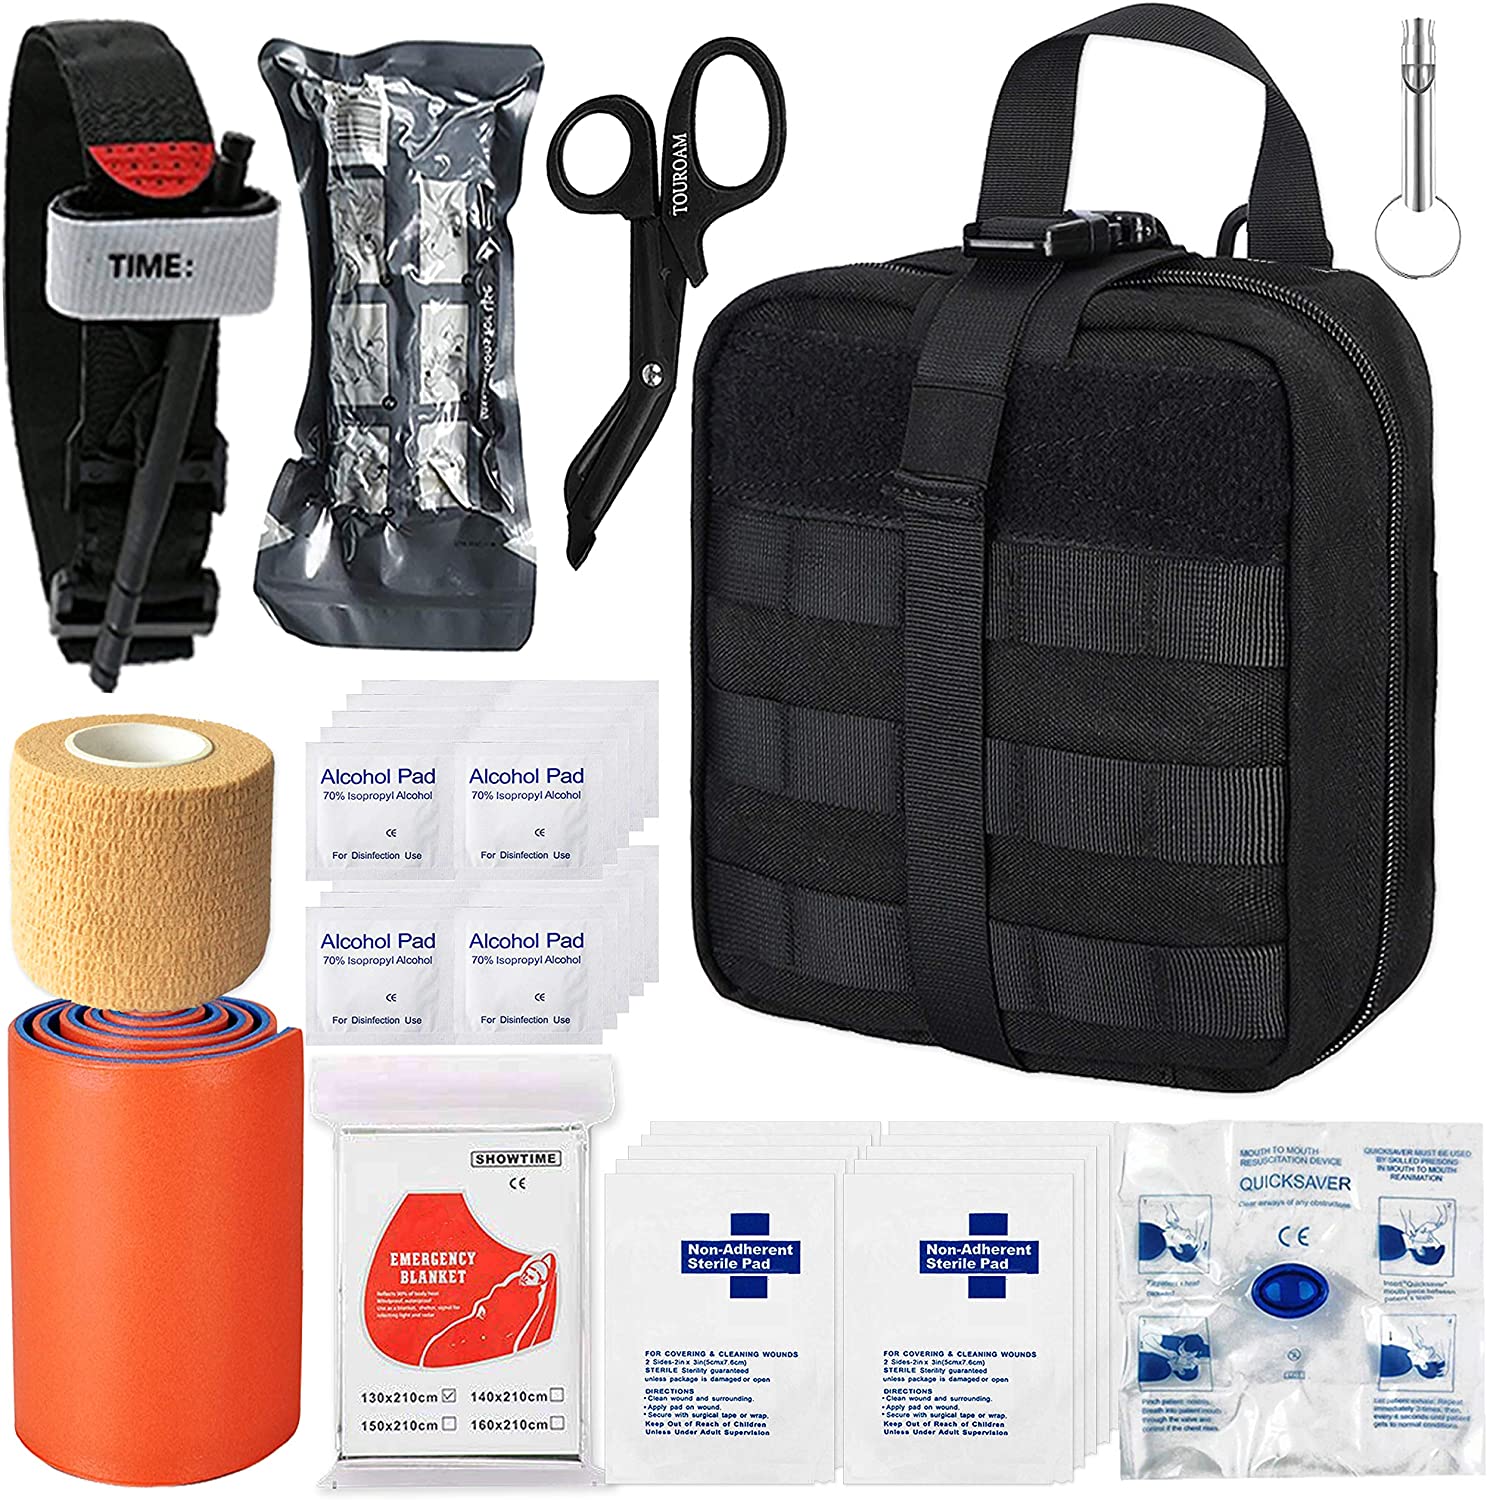 GRULLIN Emergency Tactical EMT First Aid Bleed Control Kit Splint Wound Bandages,Survival Gear Military Quick Release MOLLE Pouch with Trauma Shear 